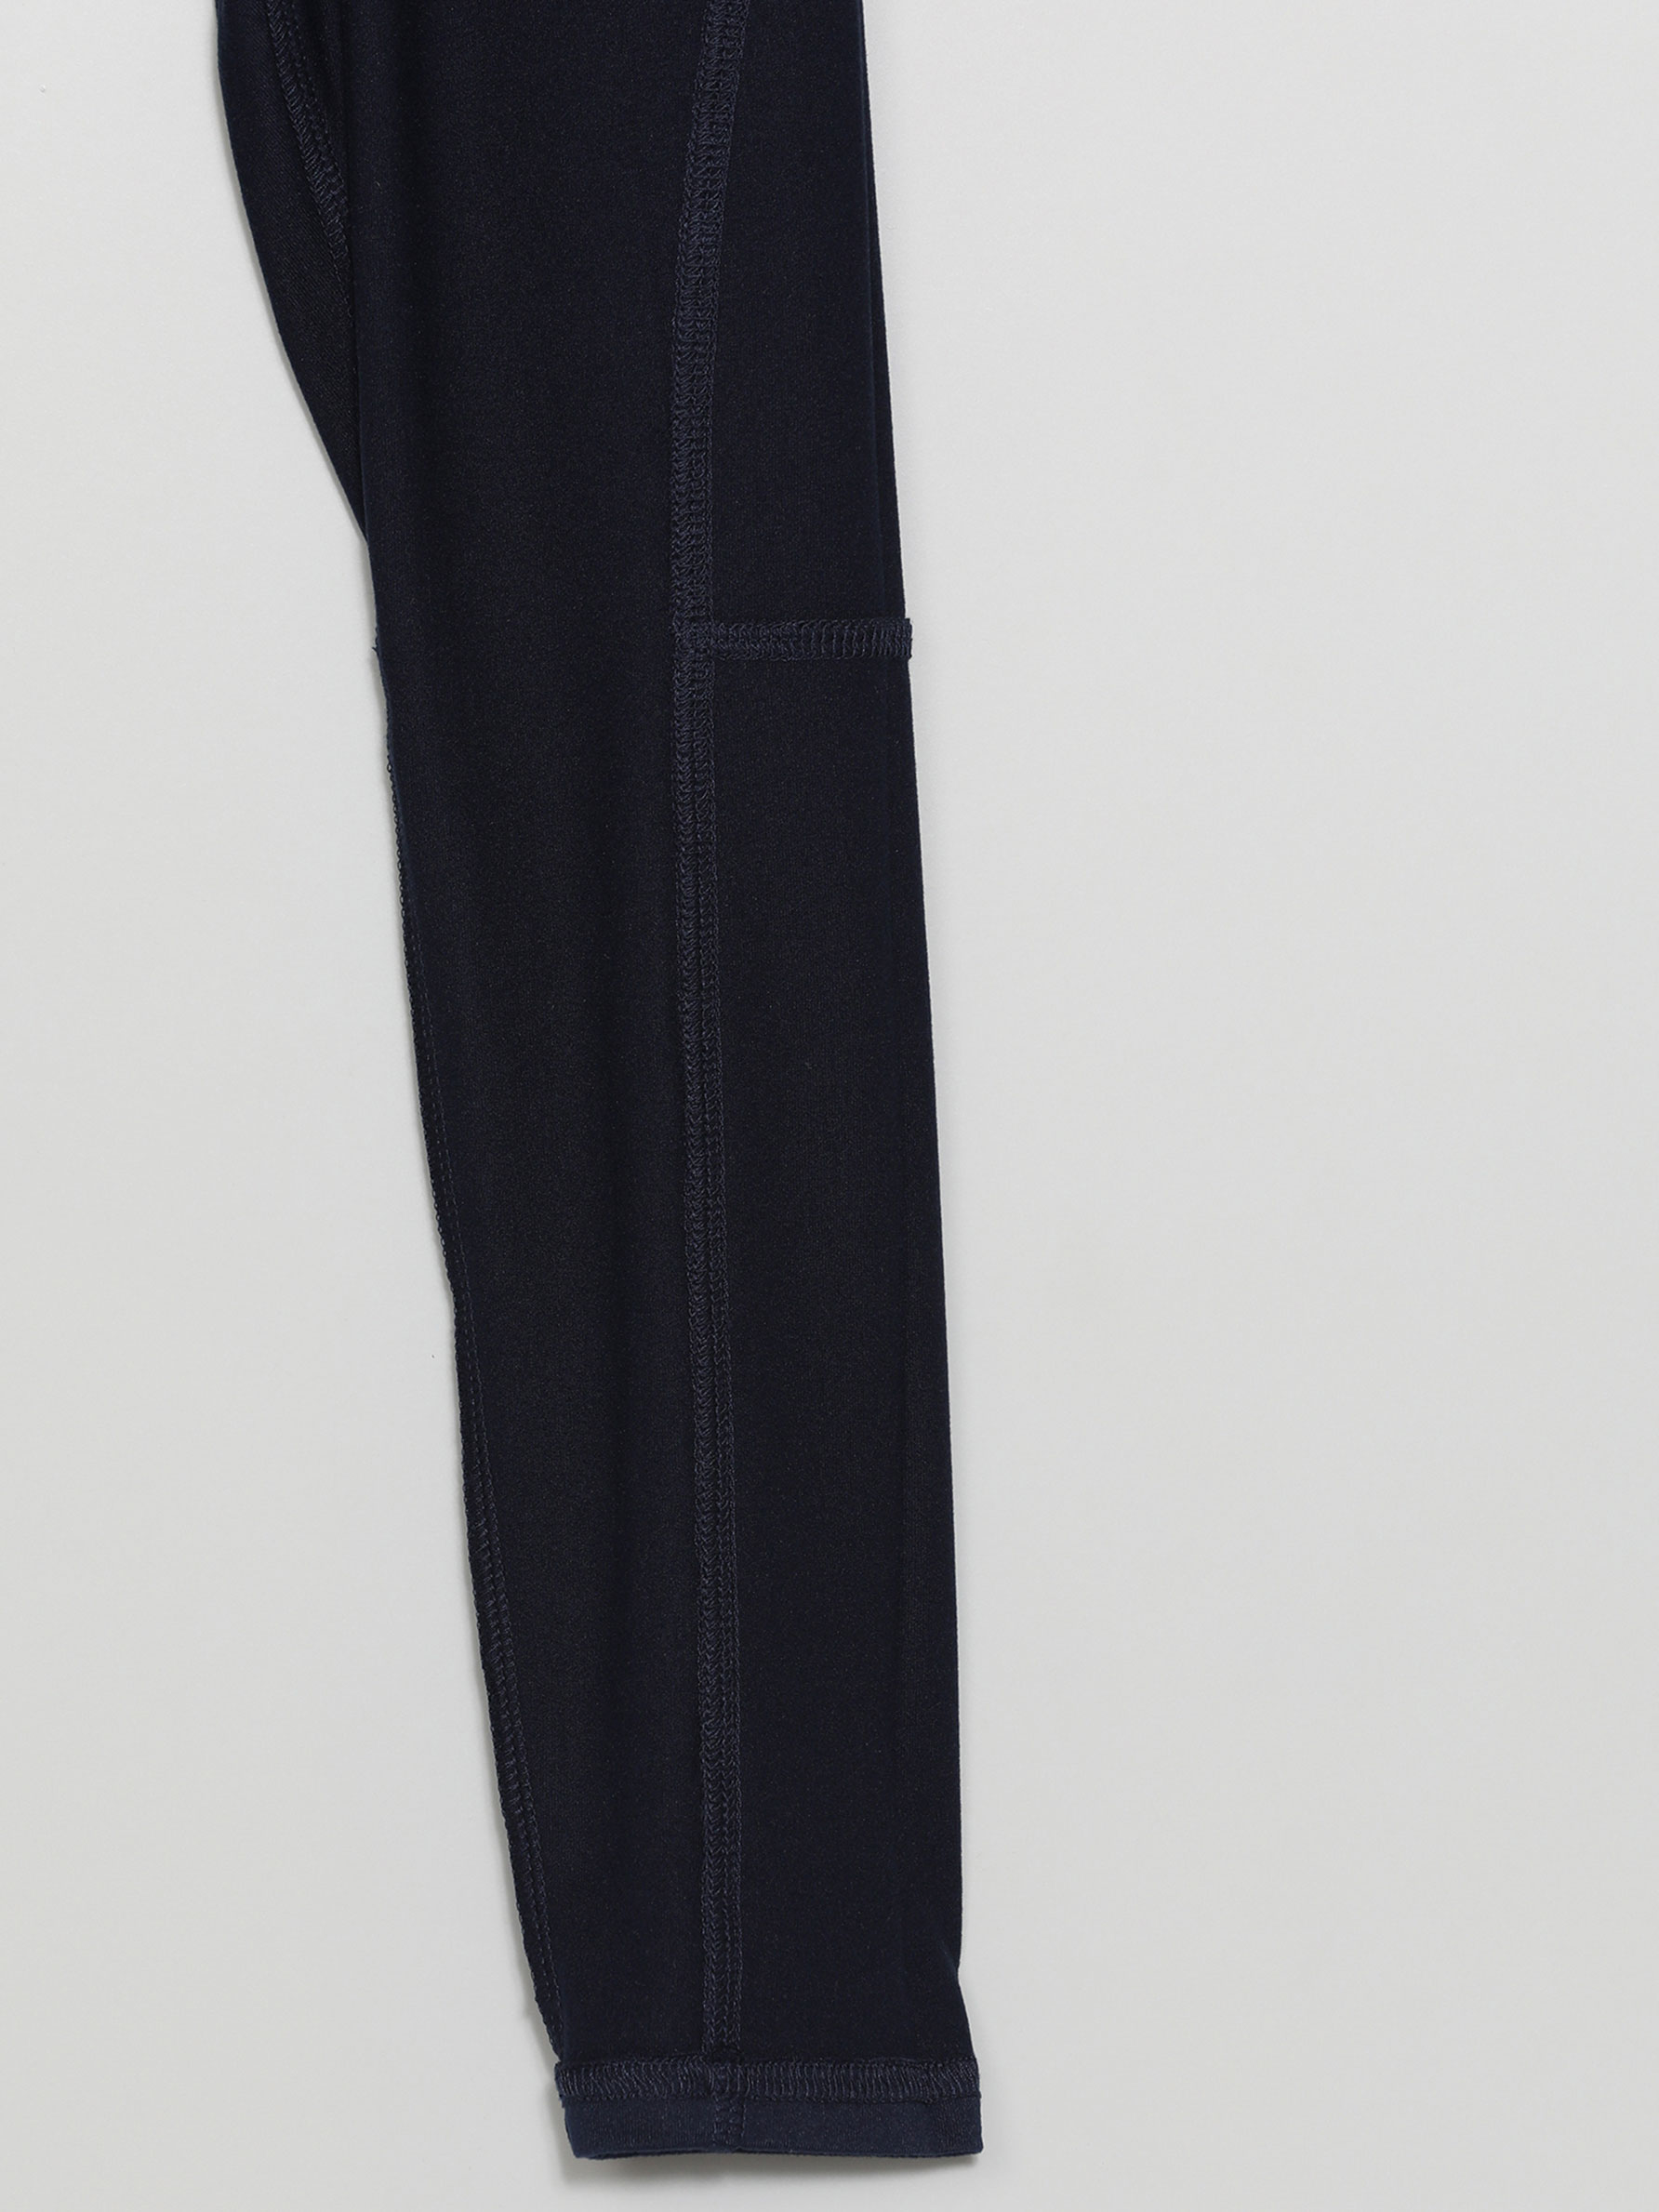 Pack of 2 pairs of long thermal sports leggings - Trousers